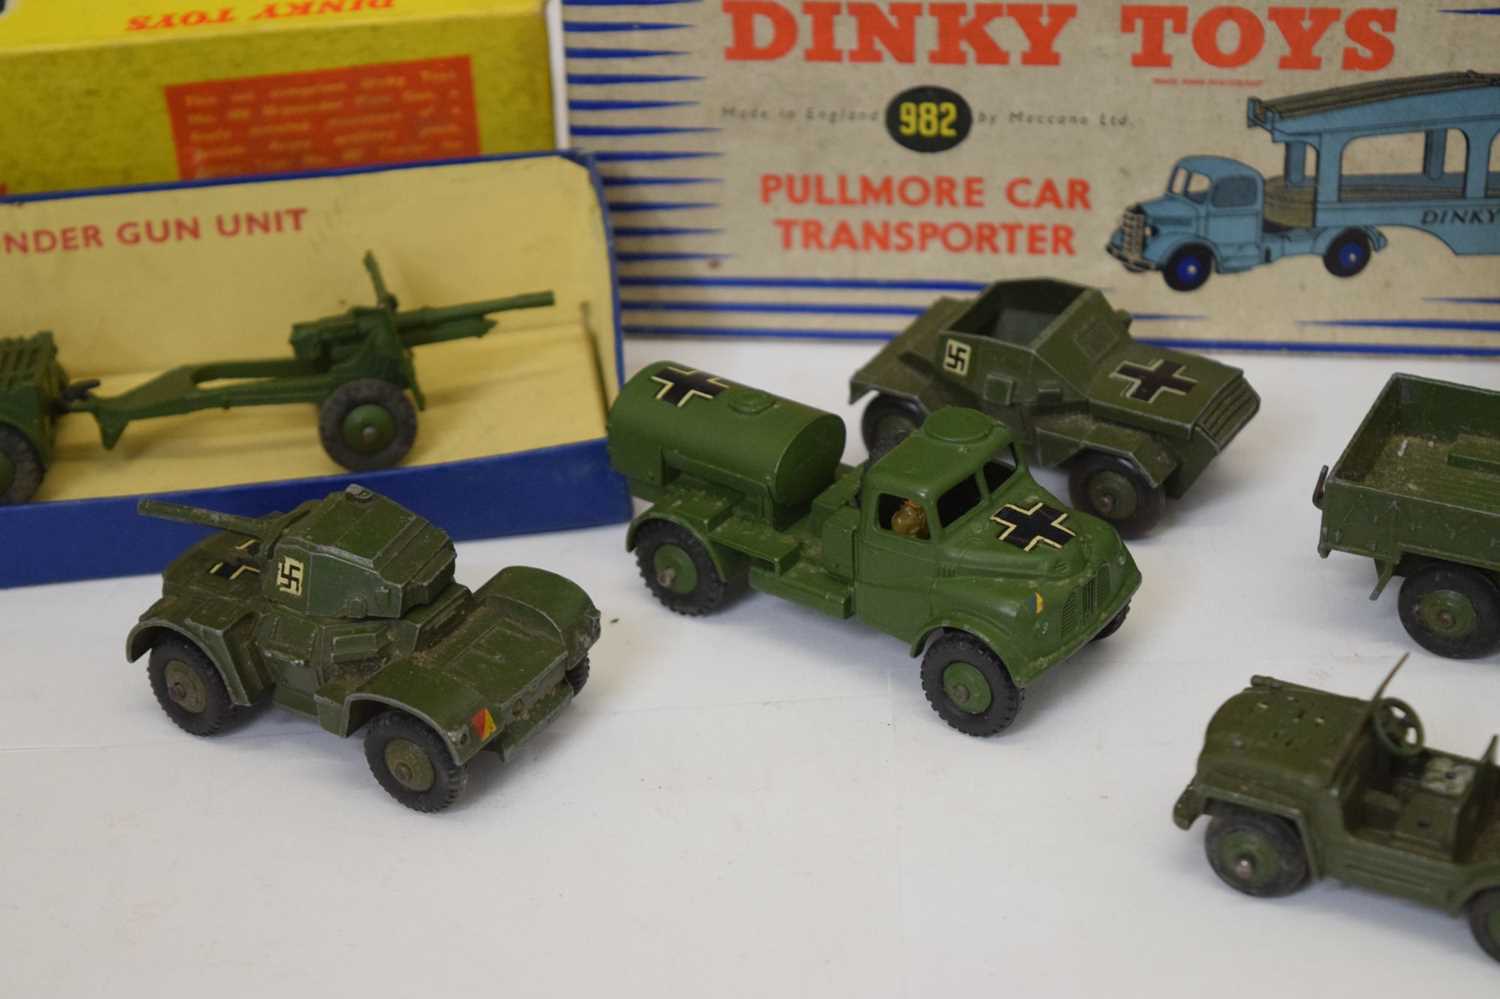 Dinky Toys - Boxed 982 'Pullmore Car Transporter' and other Dinky models - Image 5 of 7